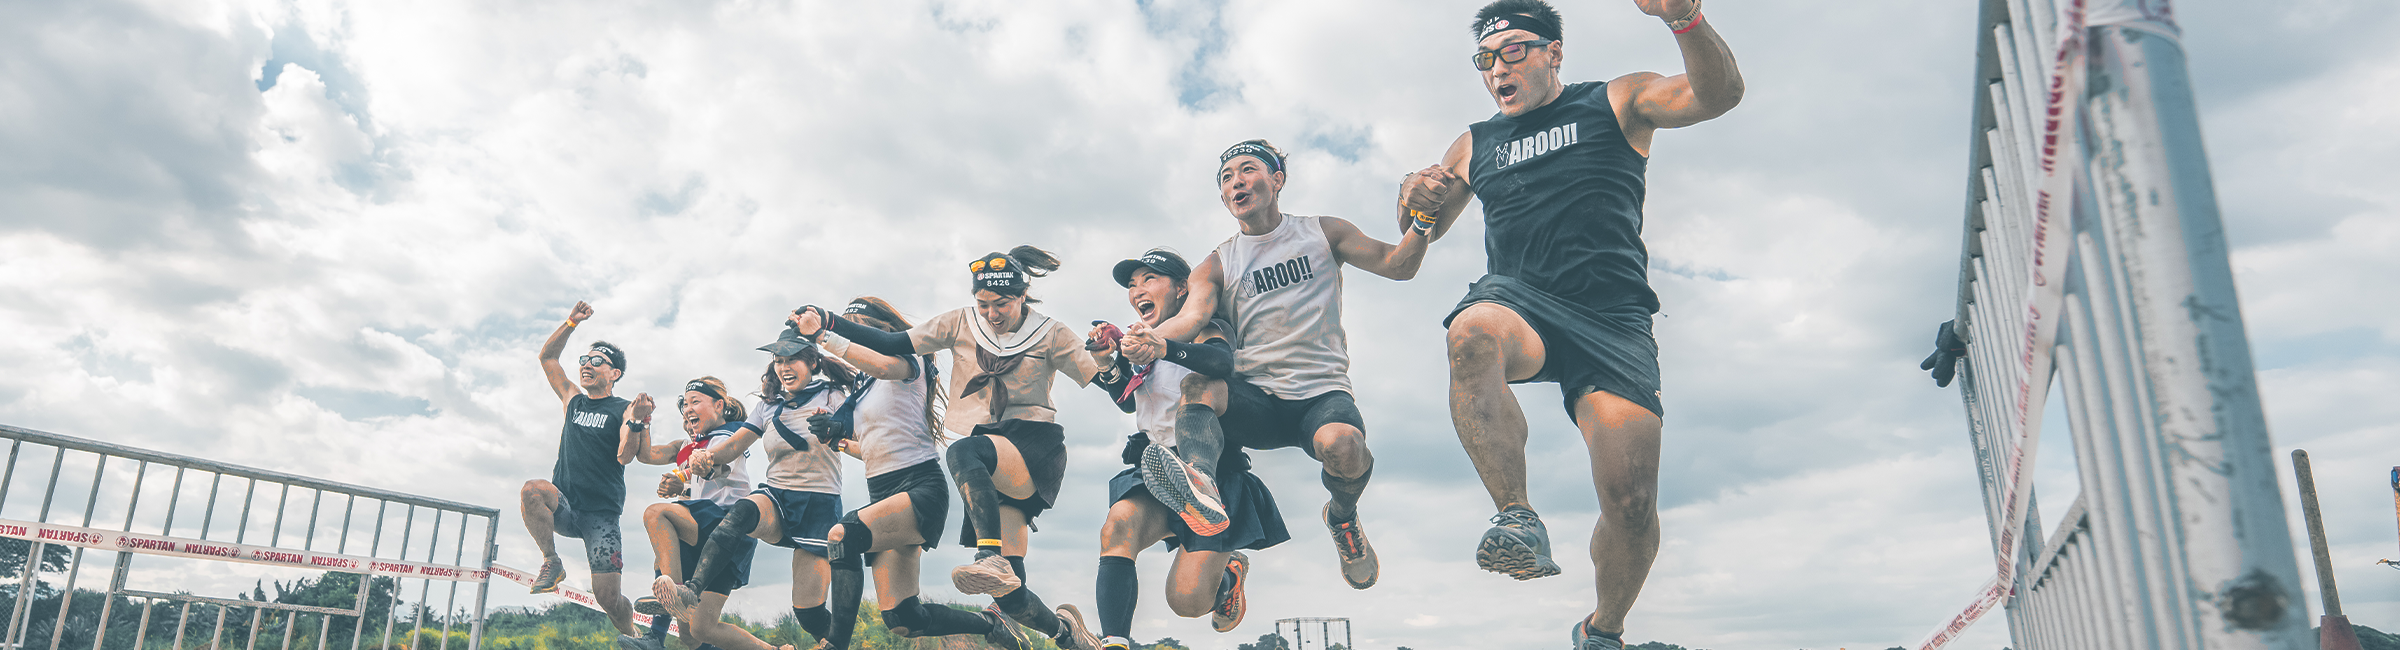 Get Ready for the Spartan PH OCR Event: North ASEAN Series! 